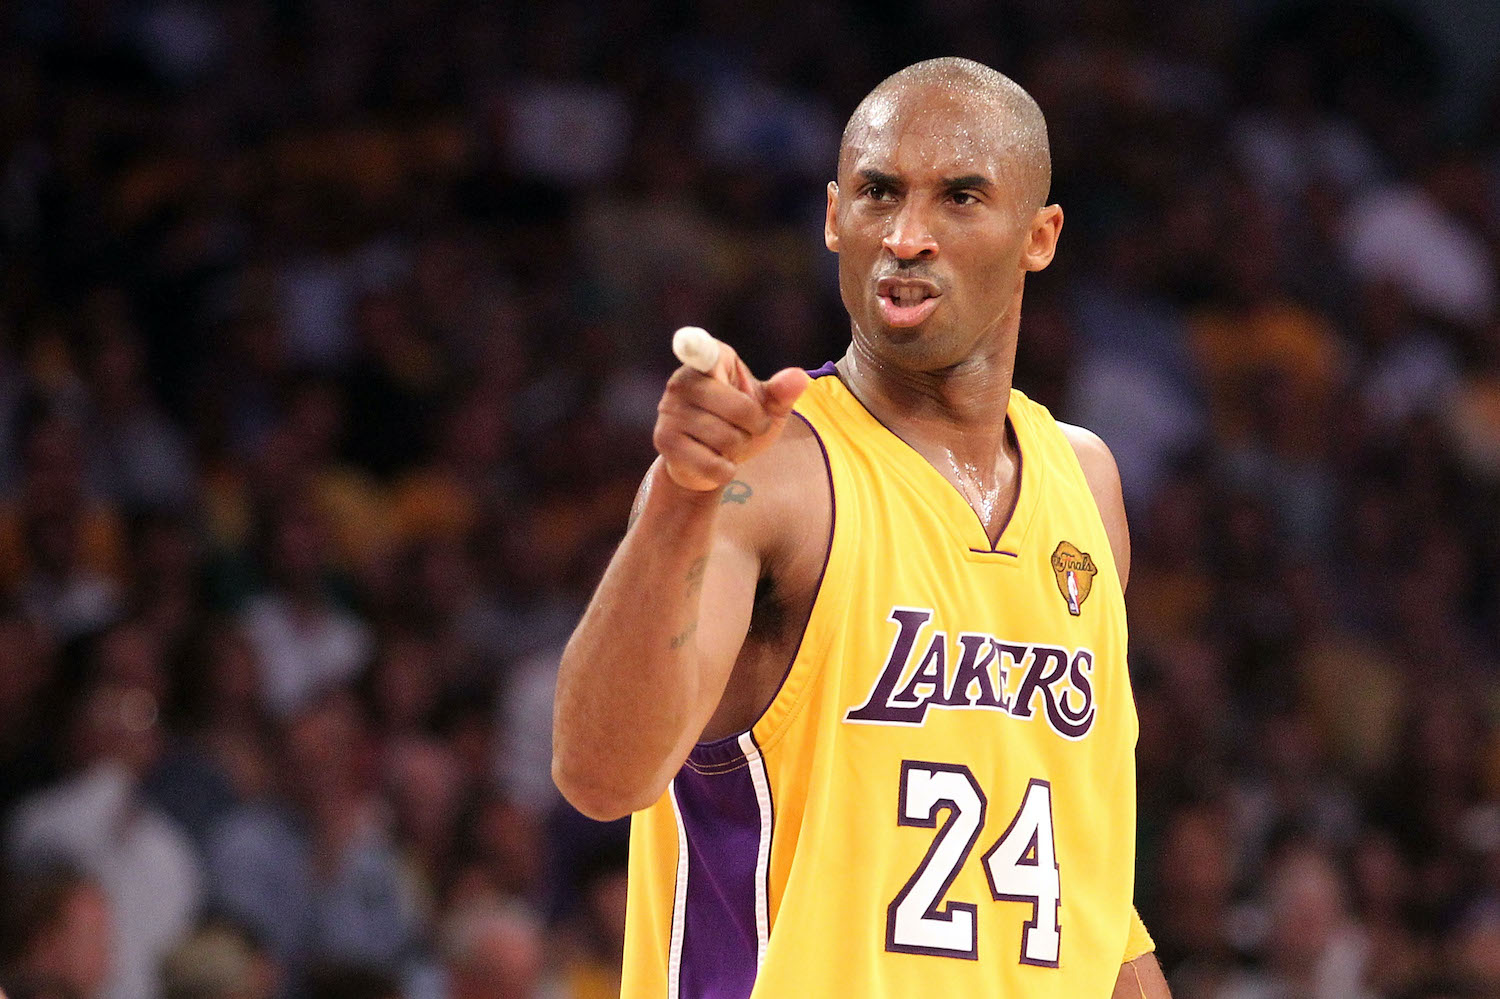 Kobe Bryant points during Game 7 of the 2010 NBA Finals.